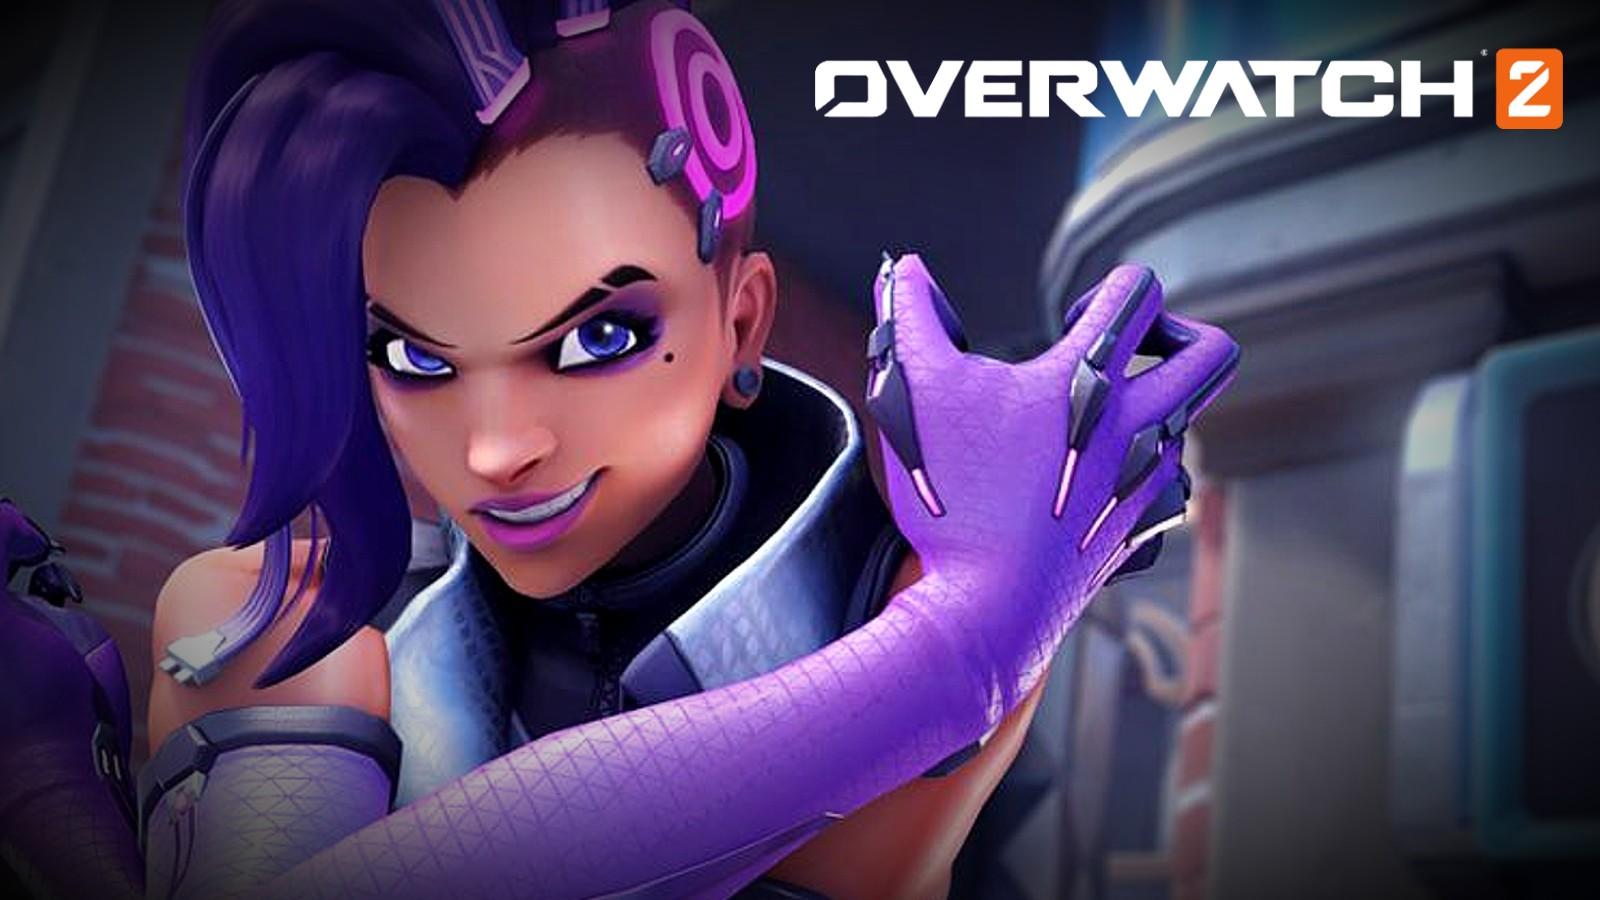 Overwatch 2 free to play